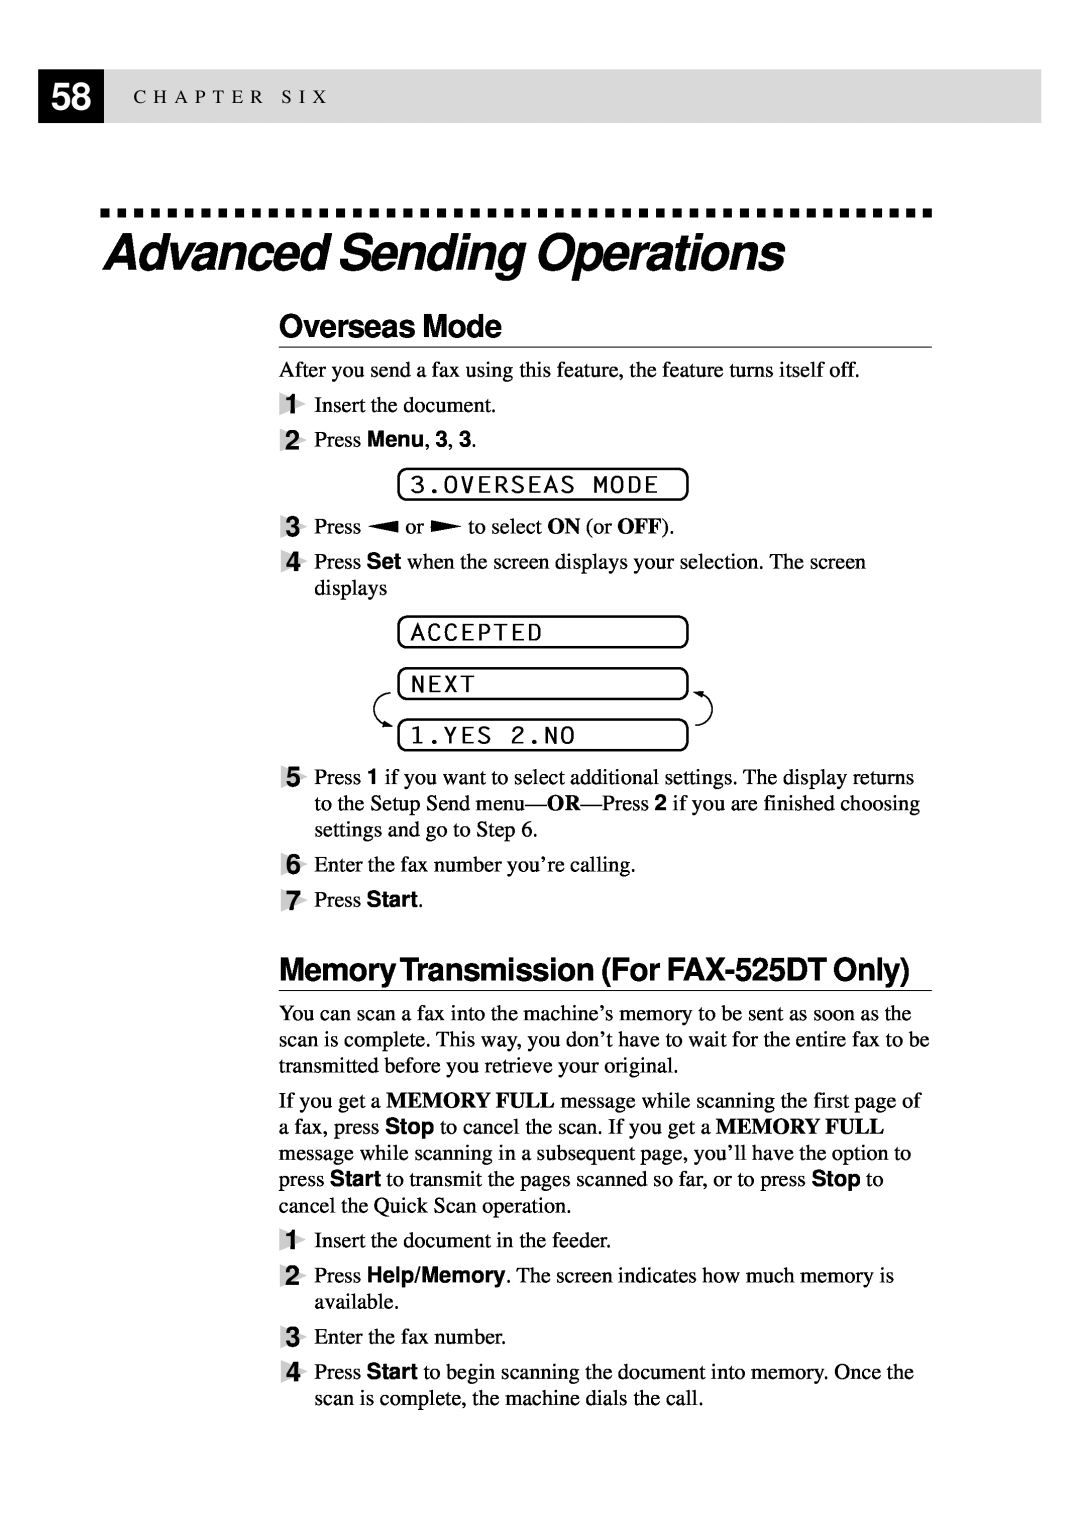 Brother 515 Advanced Sending Operations, Overseas Mode, Memory Transmission For FAX-525DT Only, ACCEPTED NEXT 1.YES 2.NO 